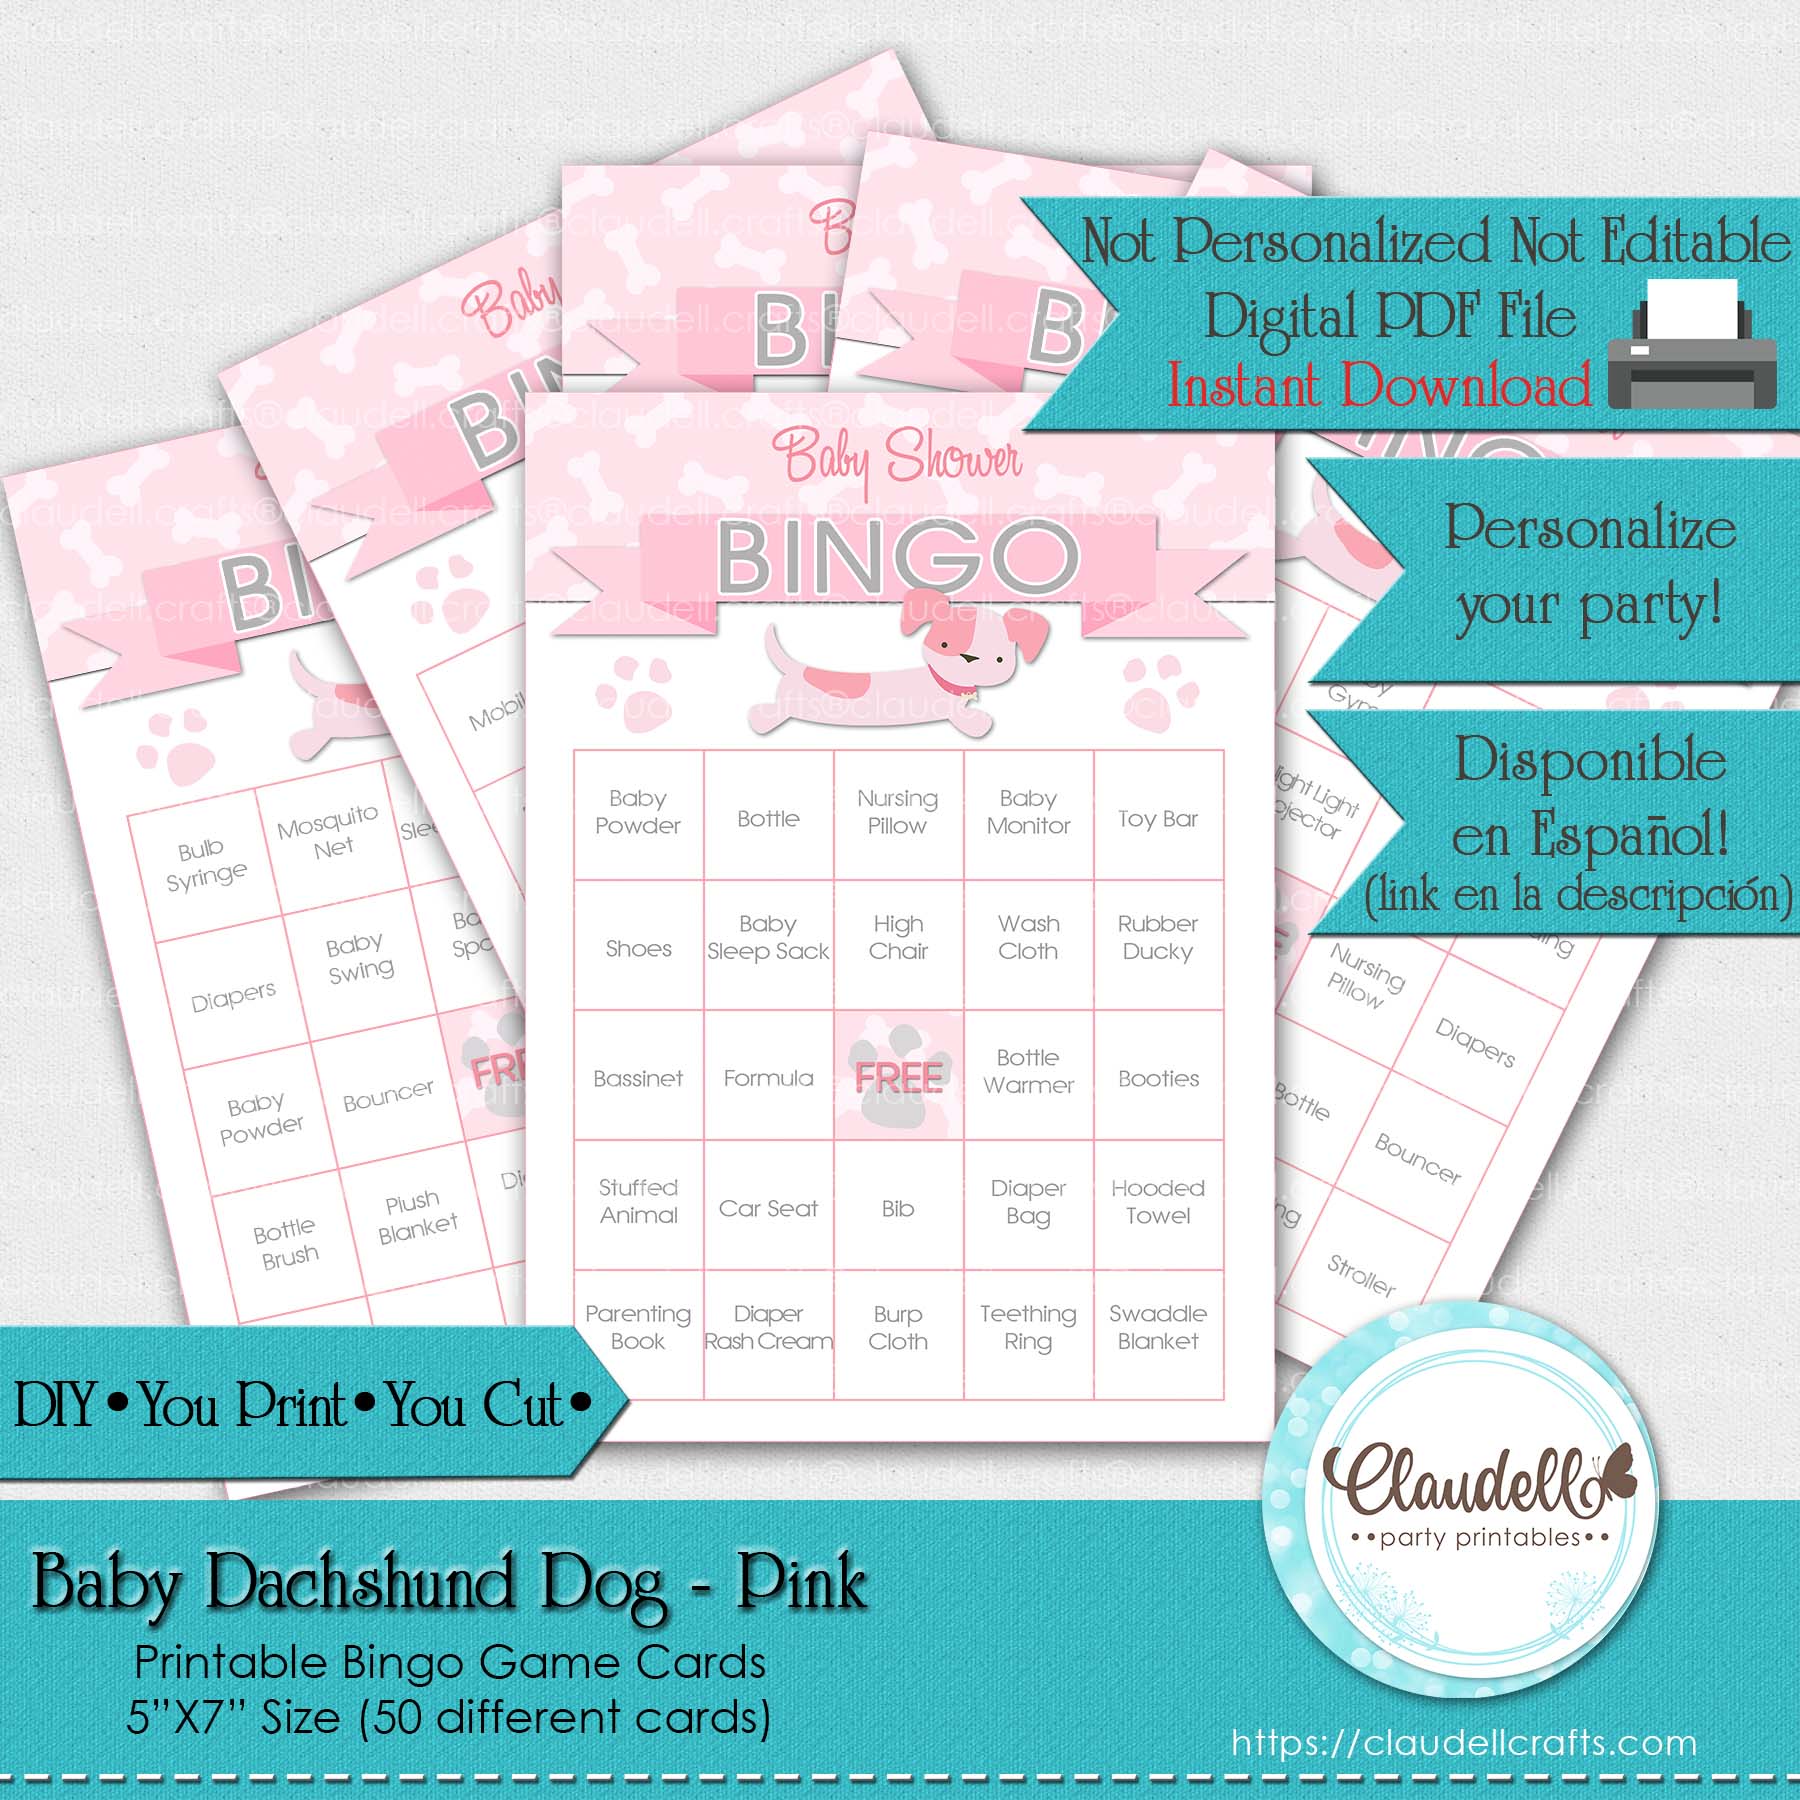 Baby Dachshund Dog - Pink 50 Baby Shower Game Bingo Cards (Filled) Party Favors/Digital File Only